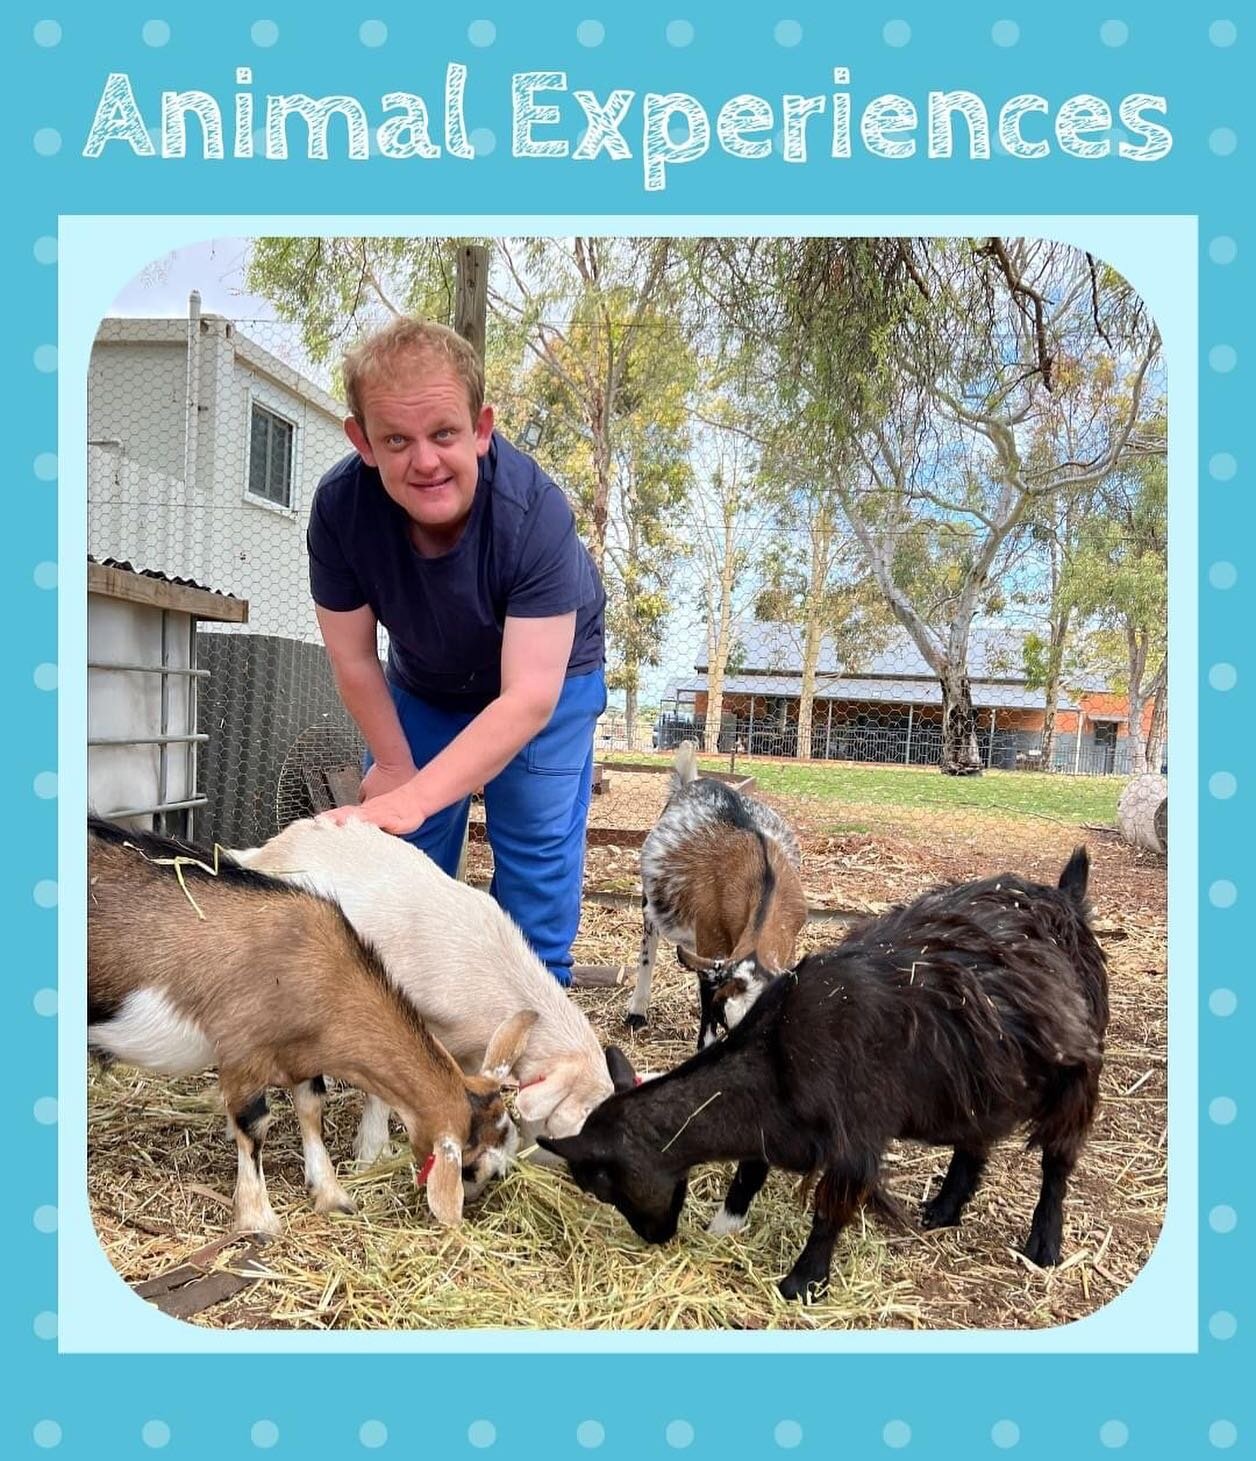 Happy Monday Everyone 🌻

Our participants are looking forward to another fun week at Windamere Park and catching up with their favourite furry animals! 💙

We love being able to provide them with a safe environment where they can get up close and in